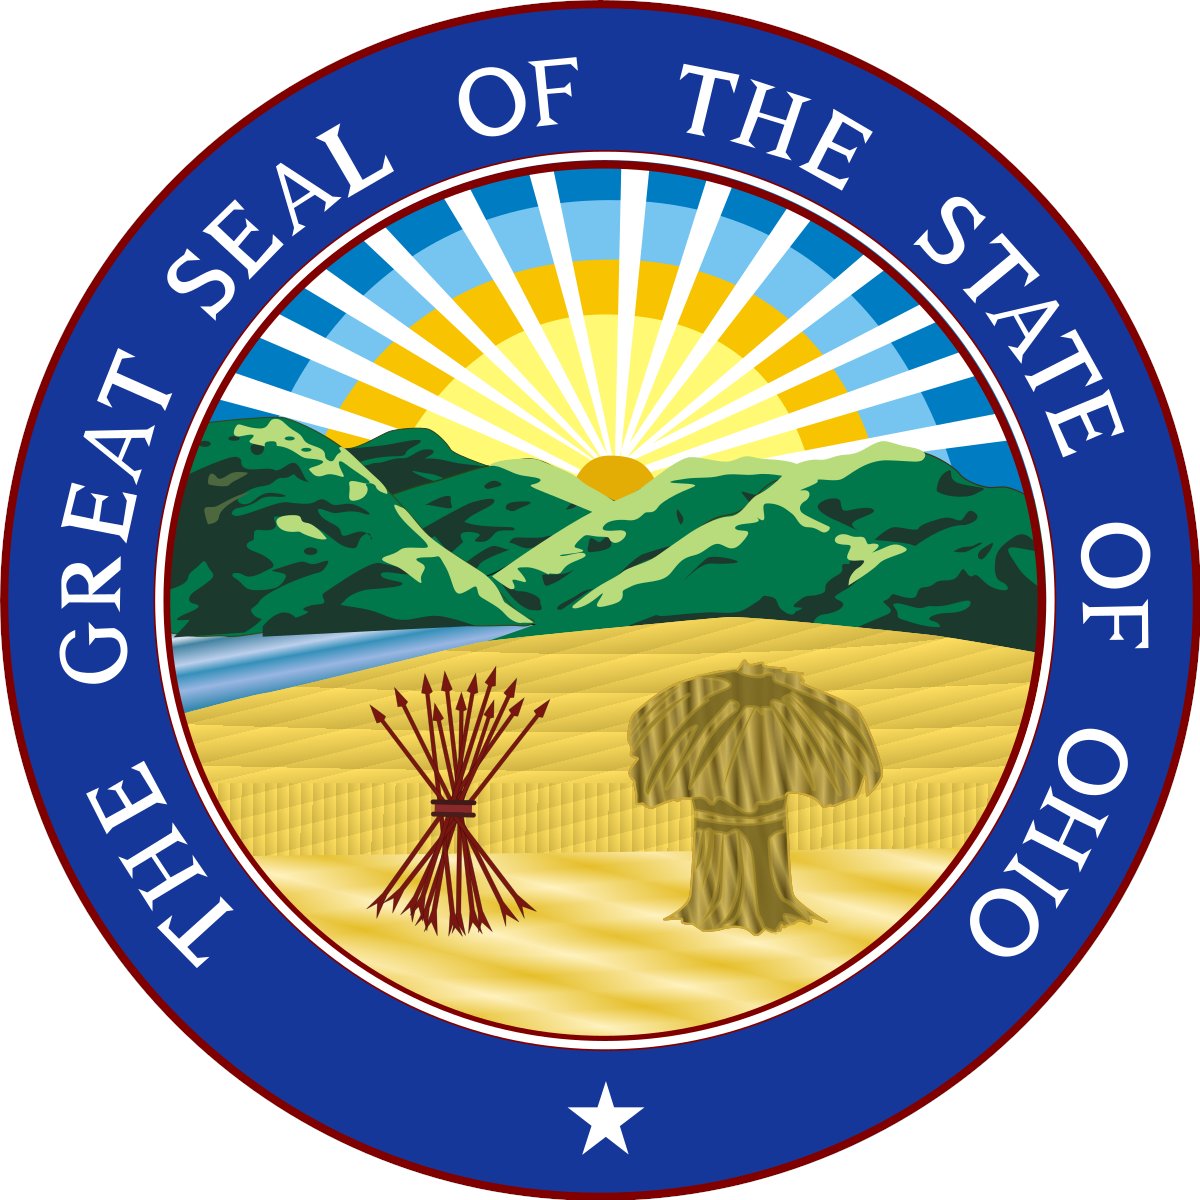 Chillicothe is also on the Great Seal of Ohio, which shows a sun rising over fields & Mount Logan. 13 sun rays symbolize the first 13 original colonies; wheat represents agriculture & 17 arrows represent Ohio's Native Americans & our status as the 17th state  #GOPCThread